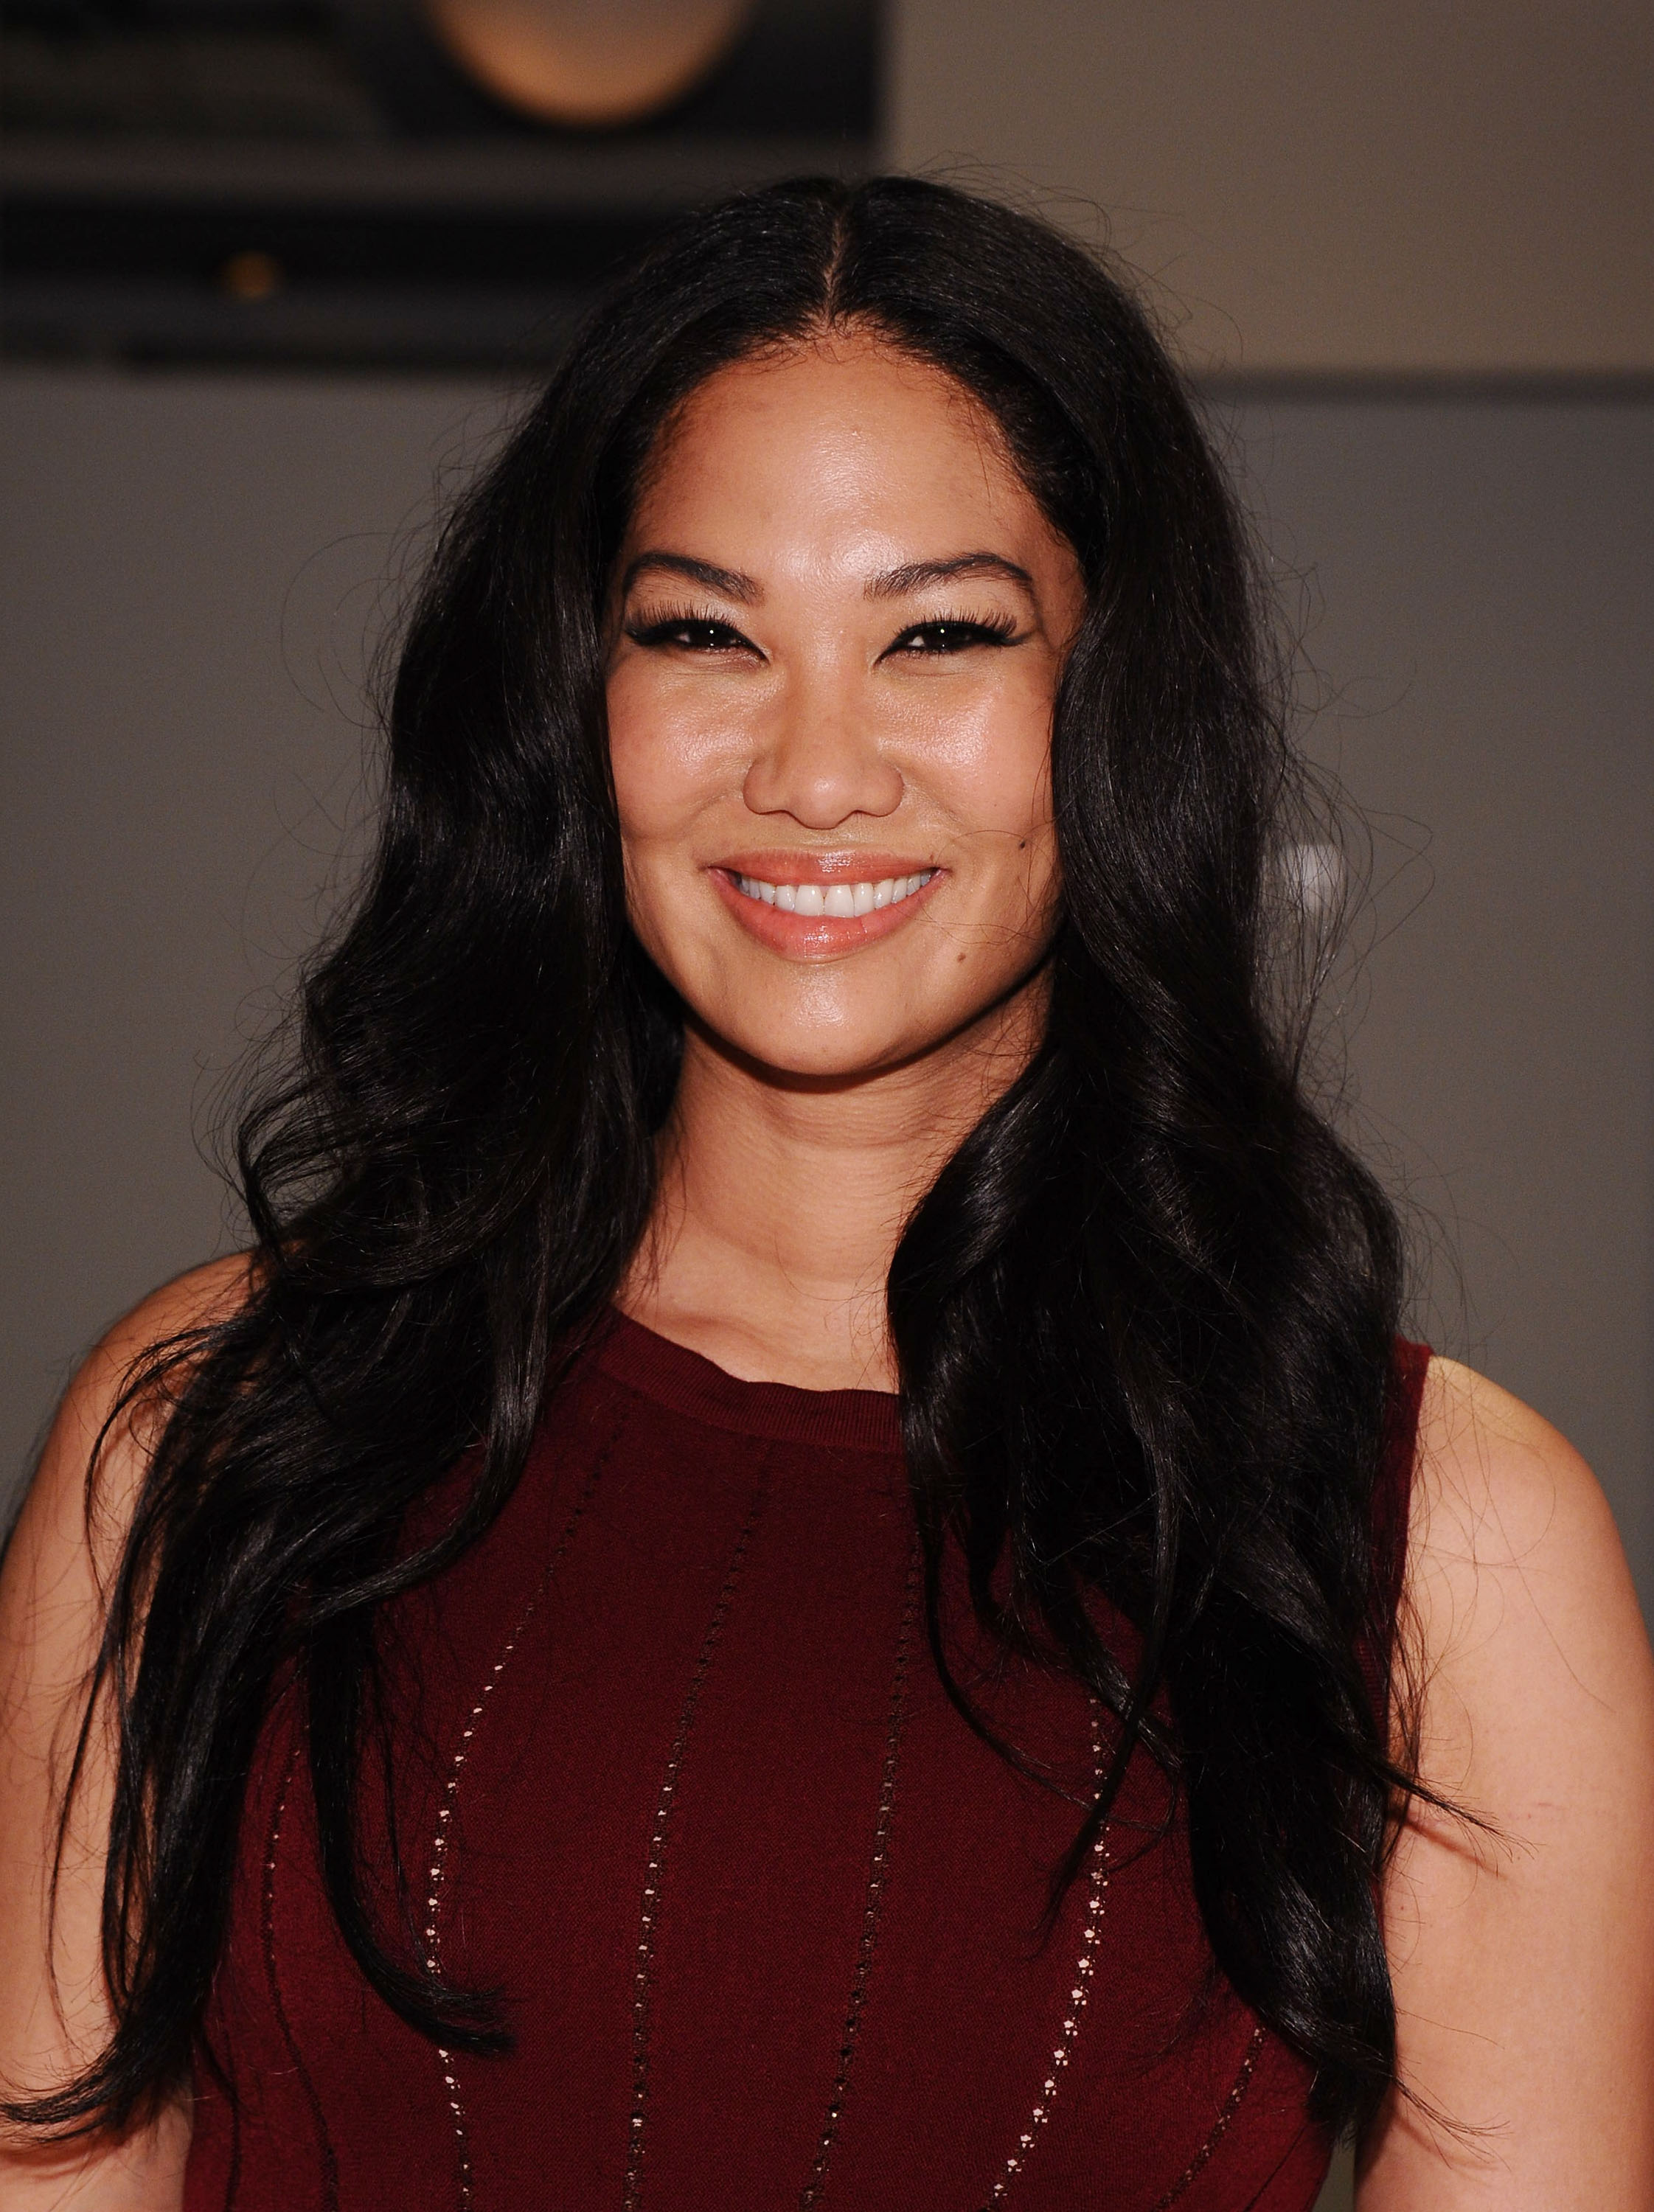 Kimora Lee Simmons at the Mercedes-Benz Fashion Week Spring 2015 at Helen Mills Event Space on September 5, 2014 in New York City. | Source: Getty Images